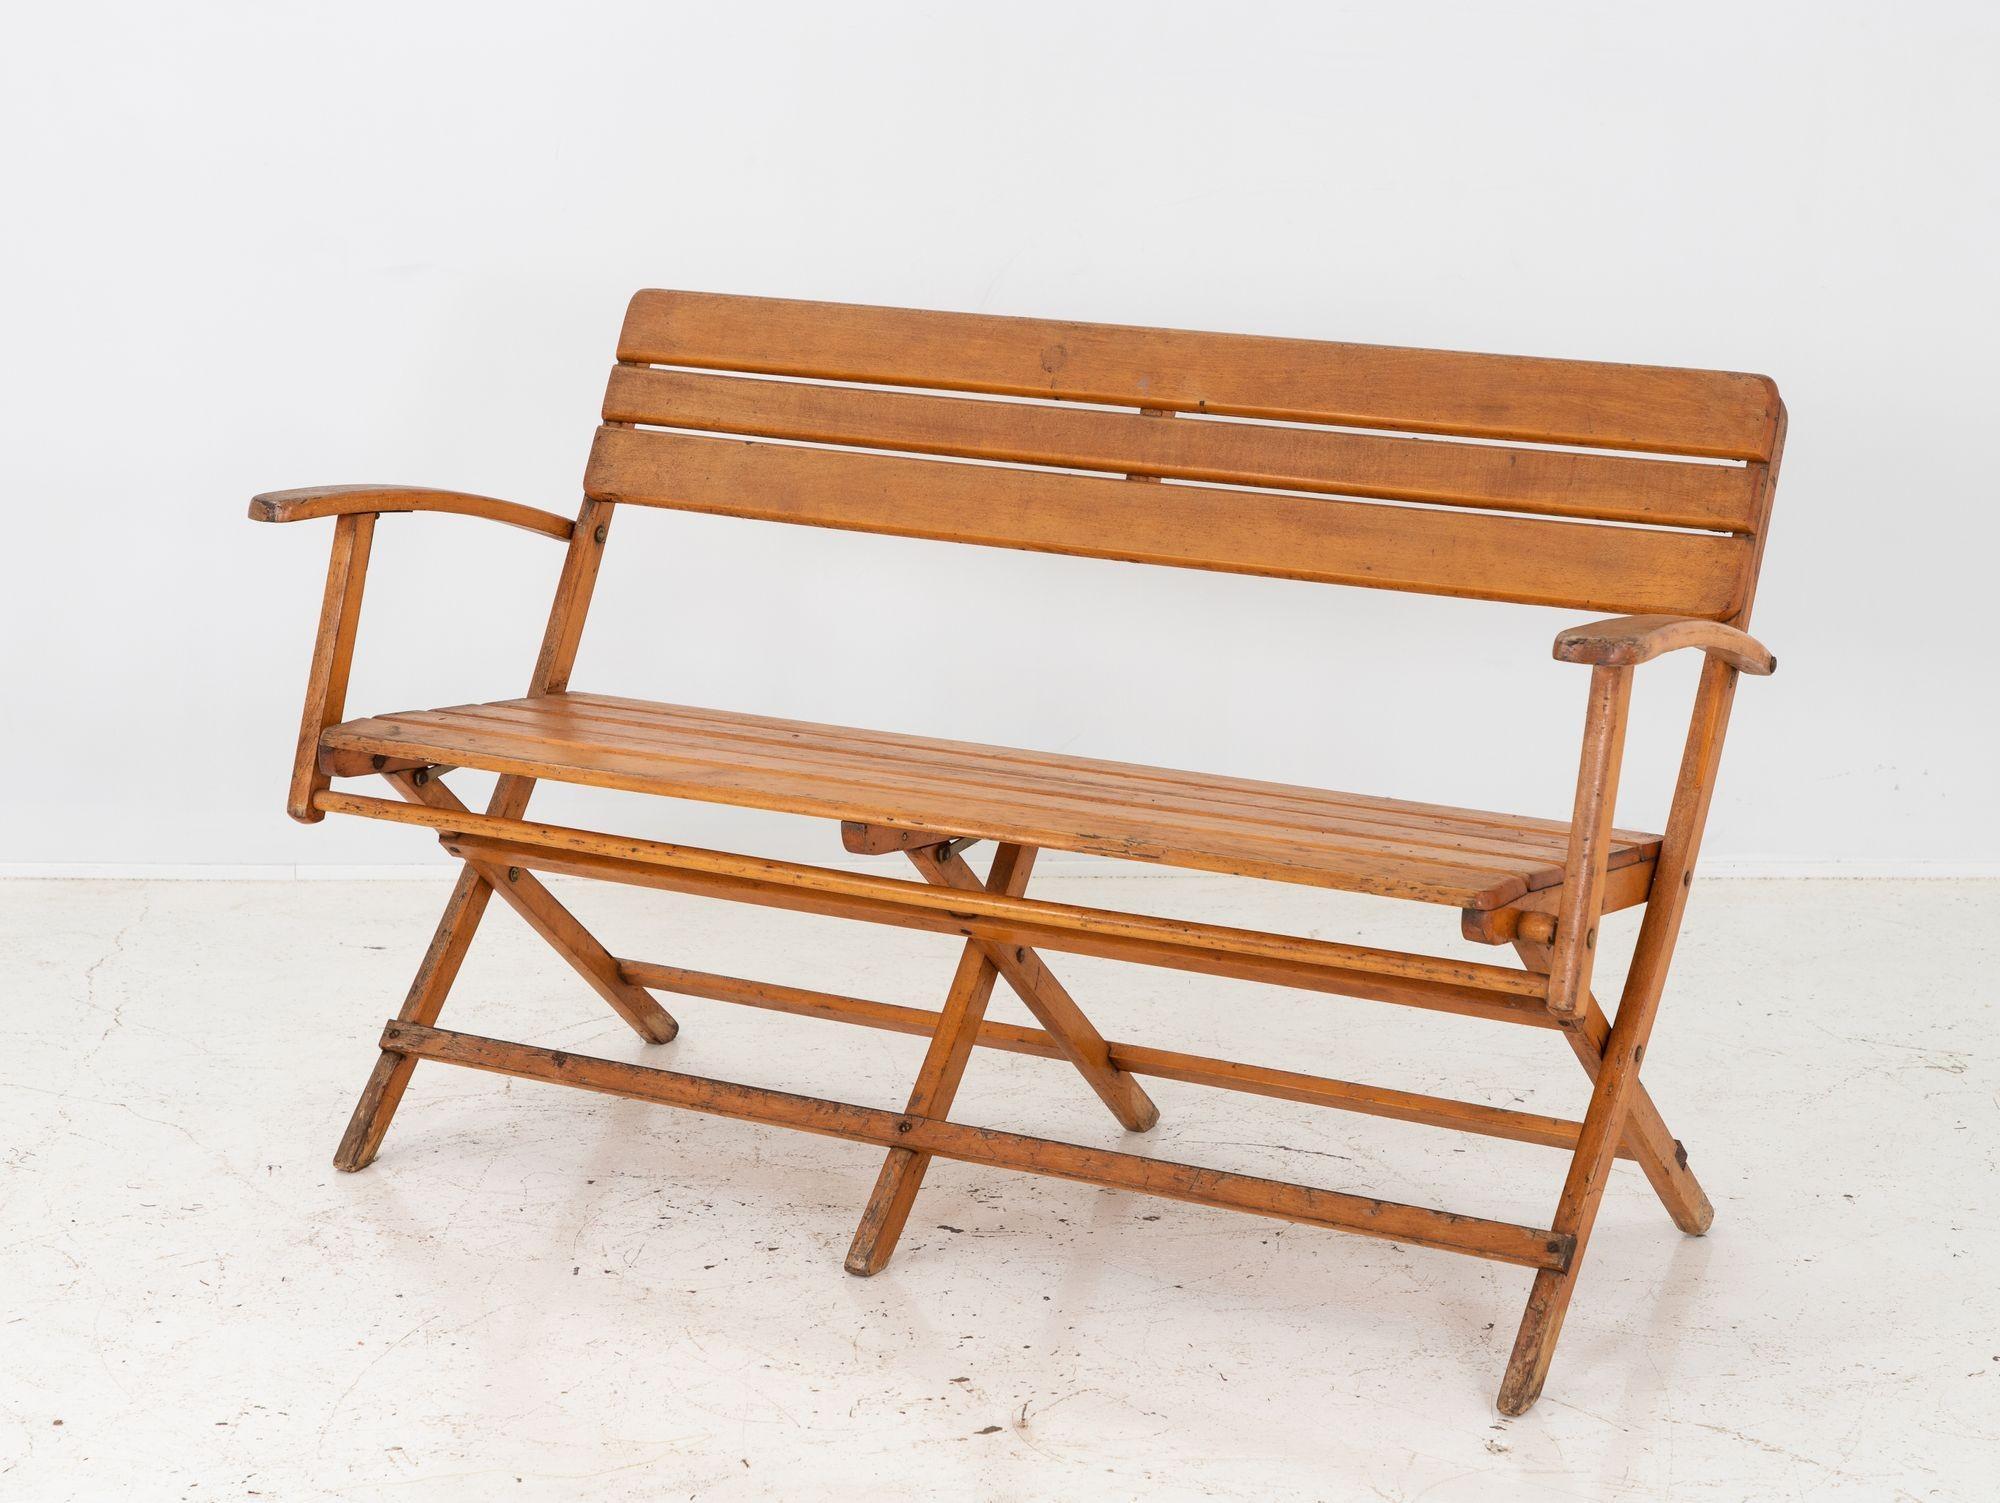 A period Bauhaus beech wood folding bench. Made in Germany in the 1930s. 17